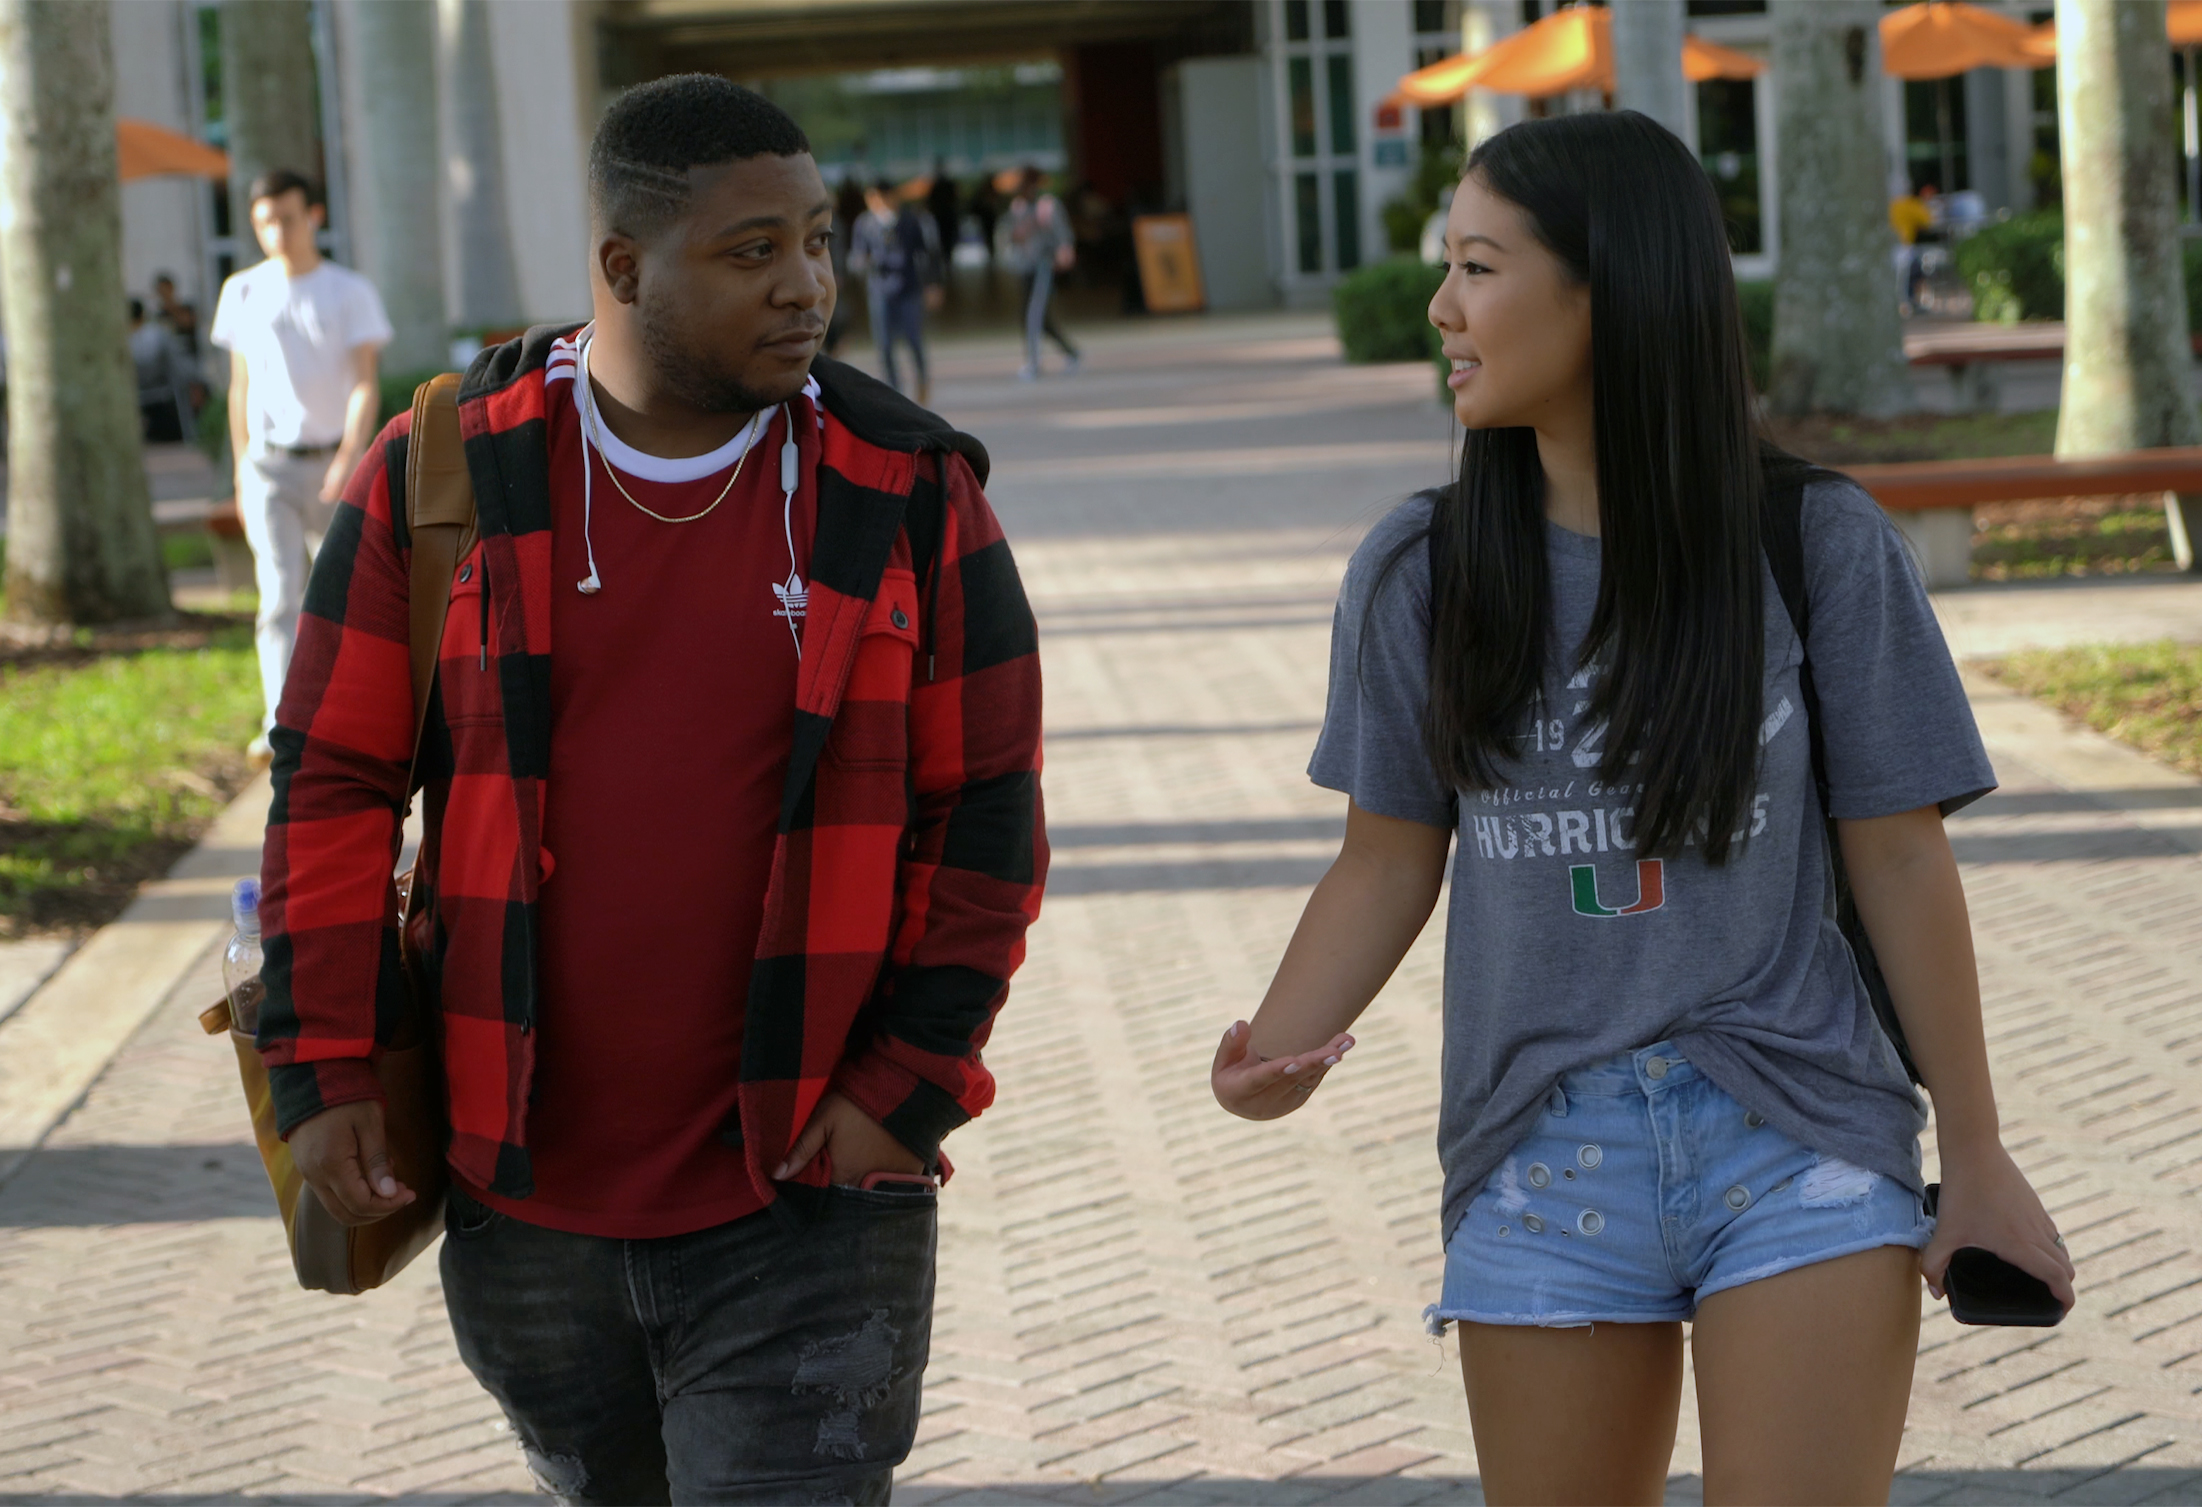 Two students talking while walking on campus.